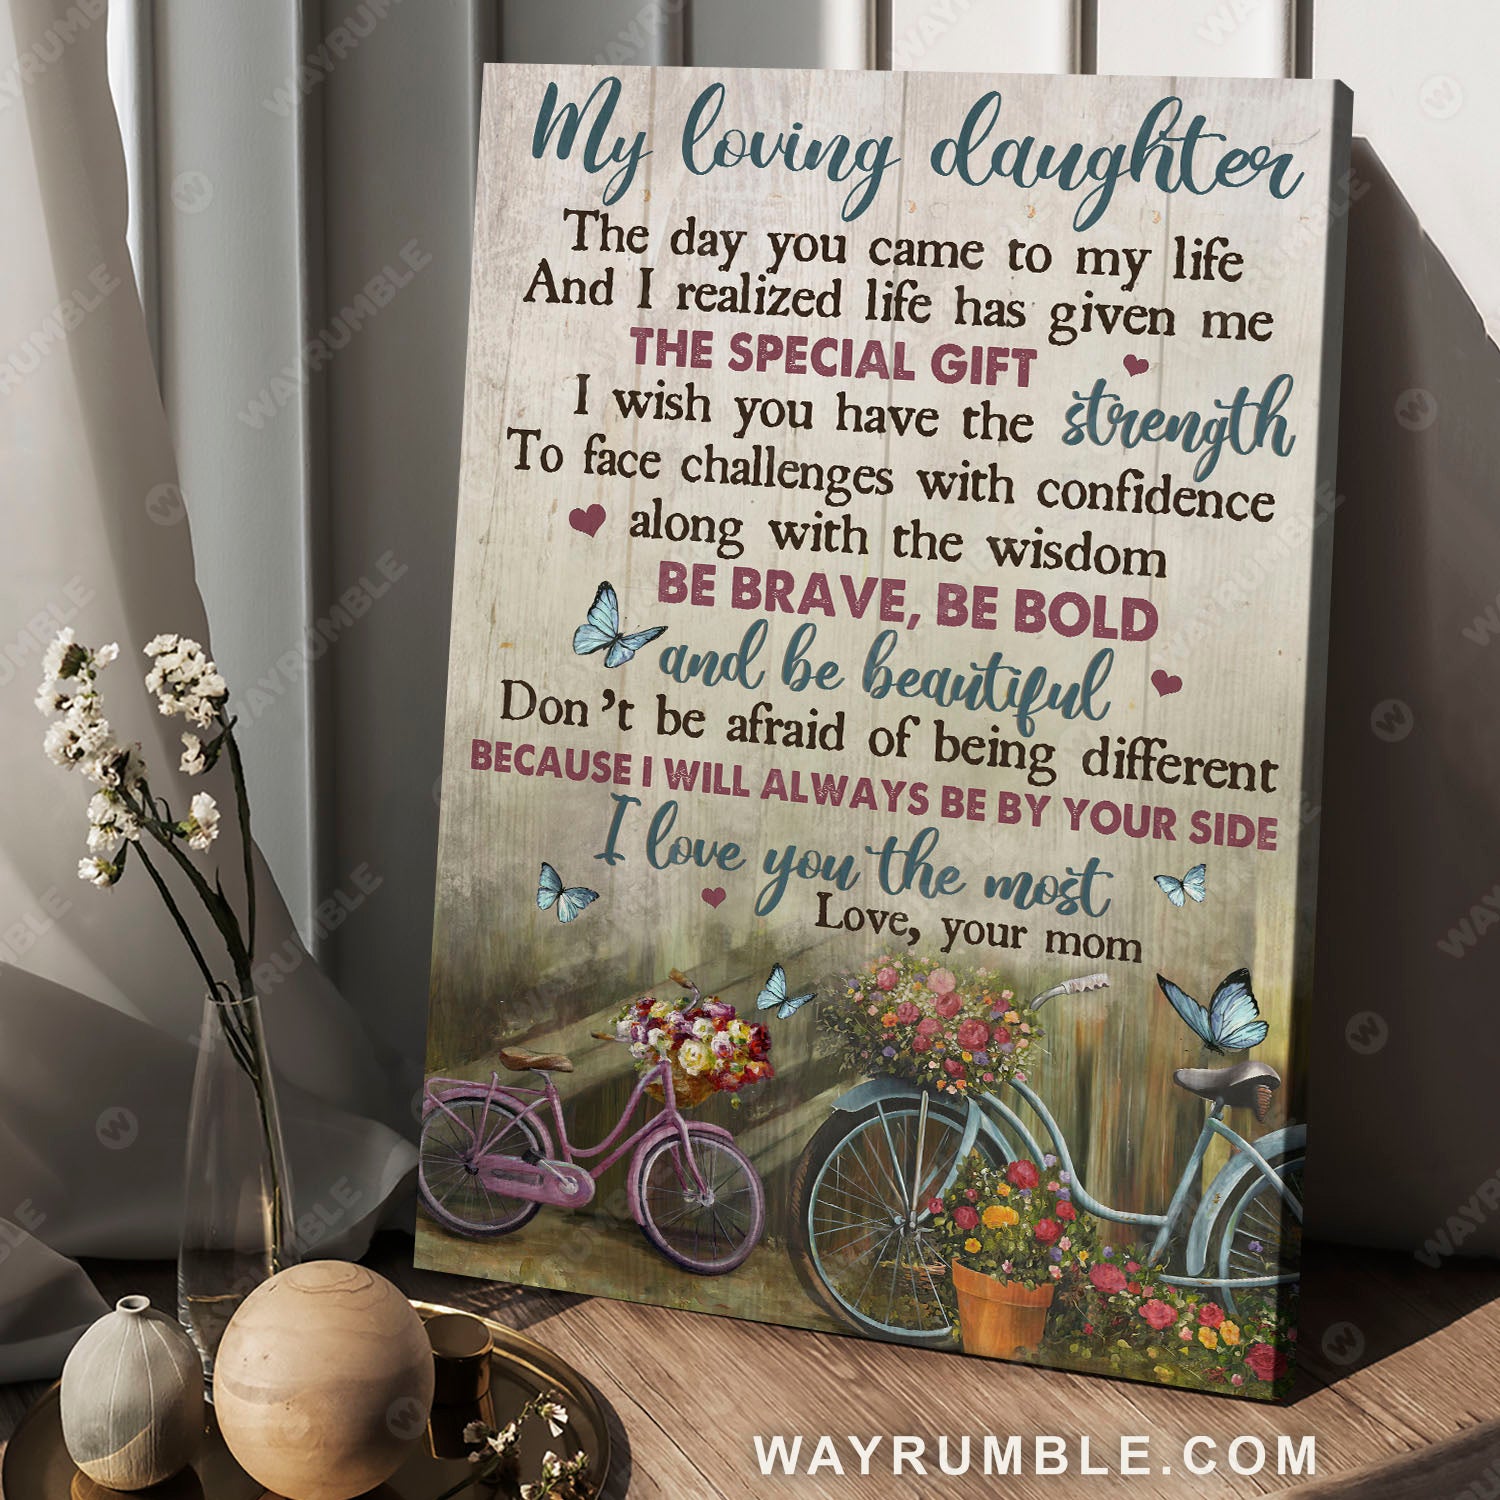 Mom to daughter, Vintage bicycle, Flower vase, I will always be by your side - Family Portrait Canvas Prints, Wall Art